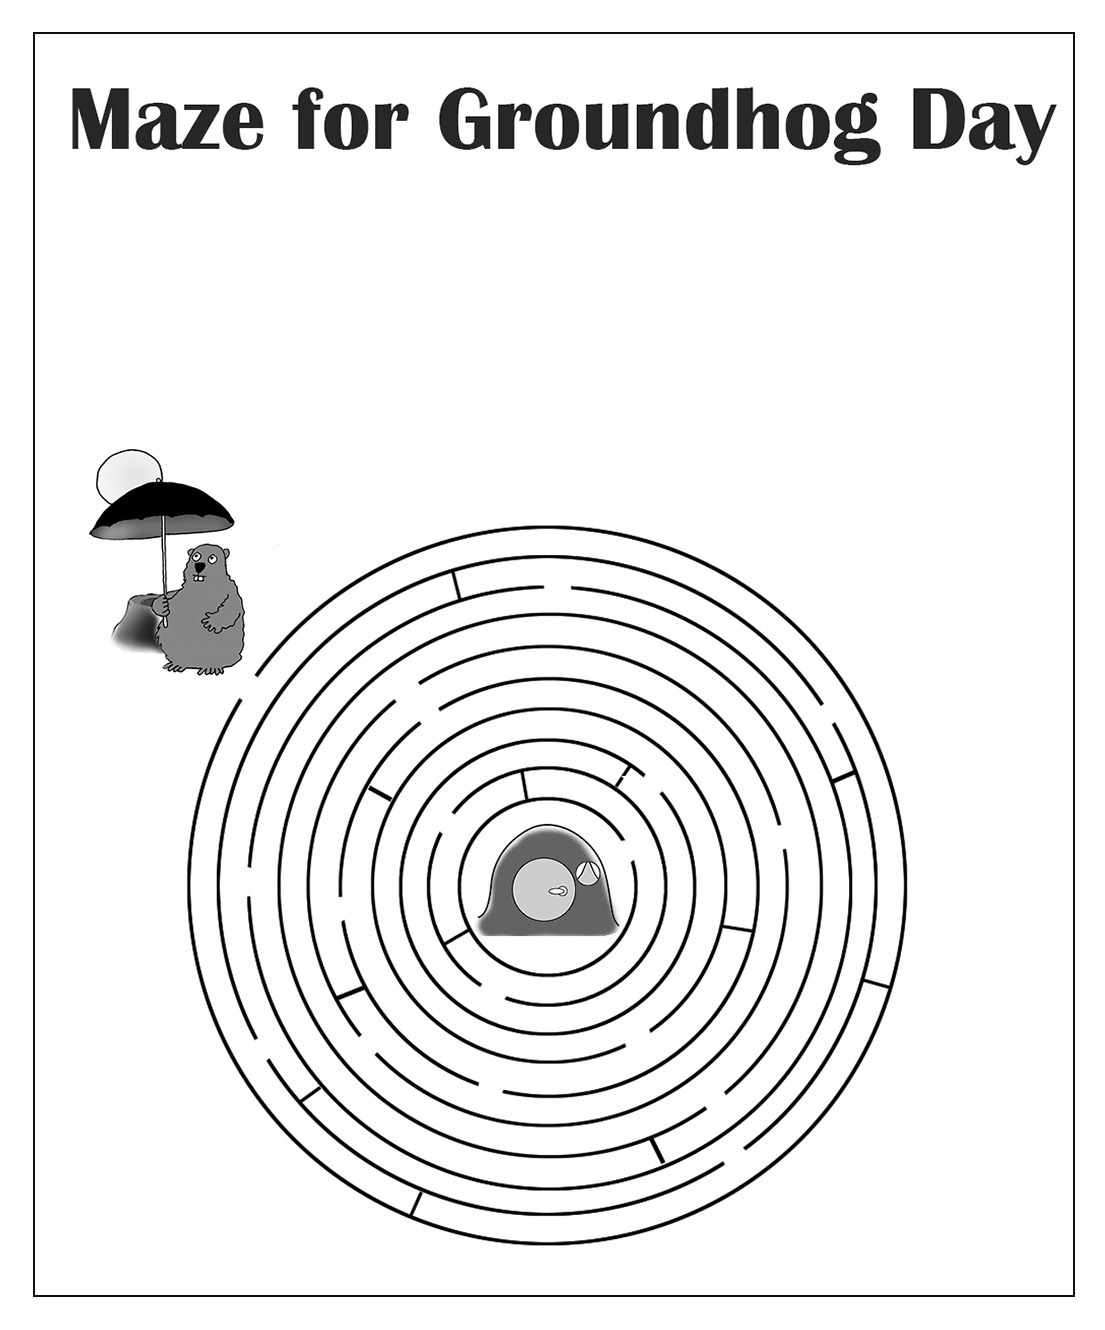 maze for Groundhog Day